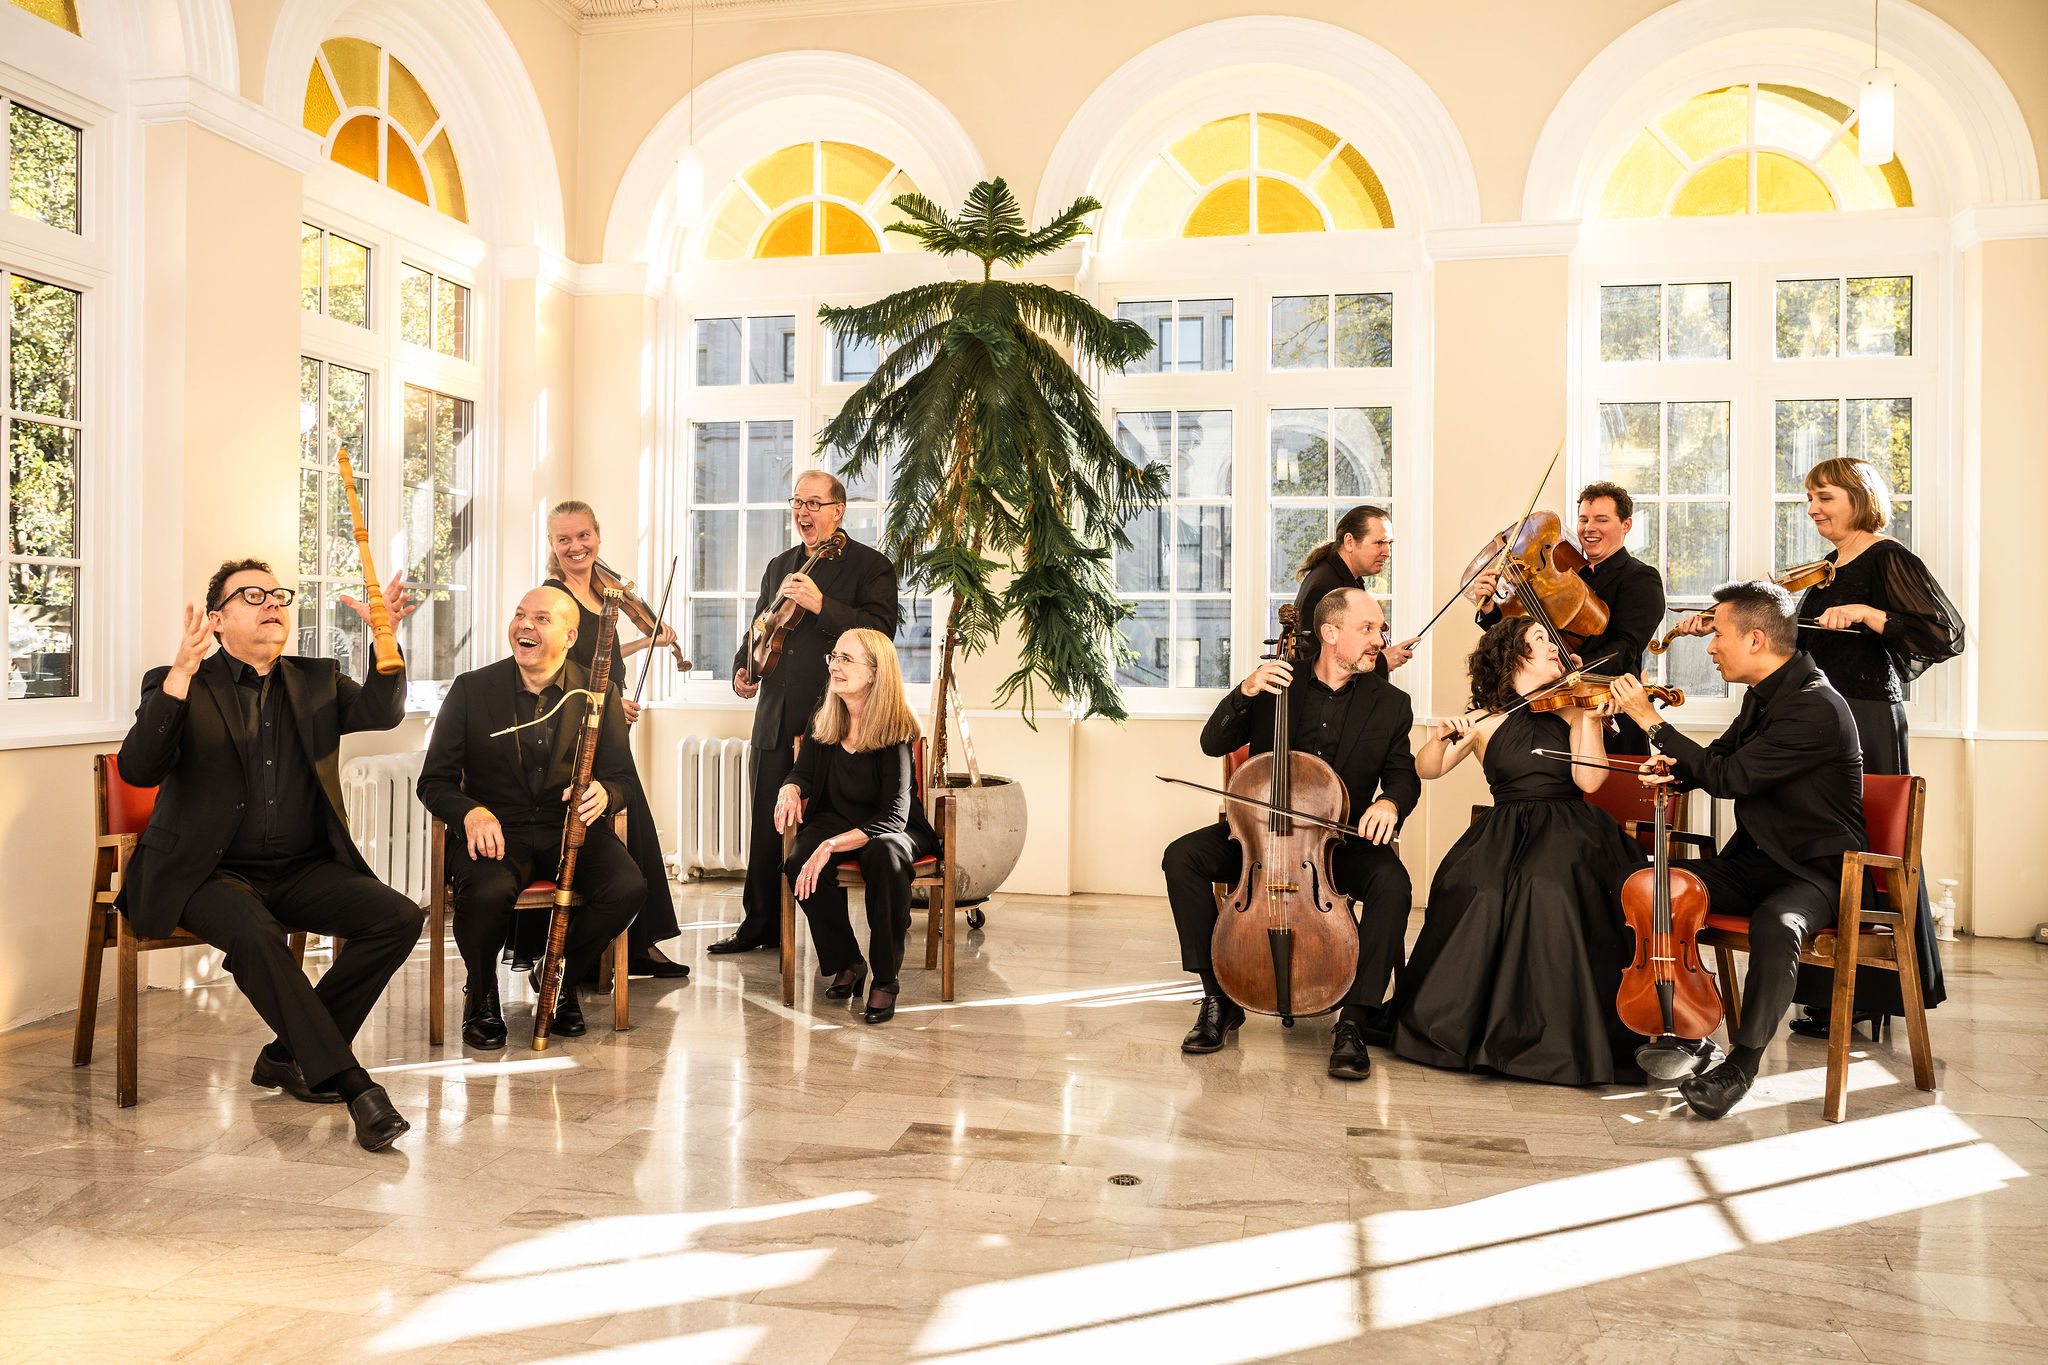 A playful photo of the orchestra